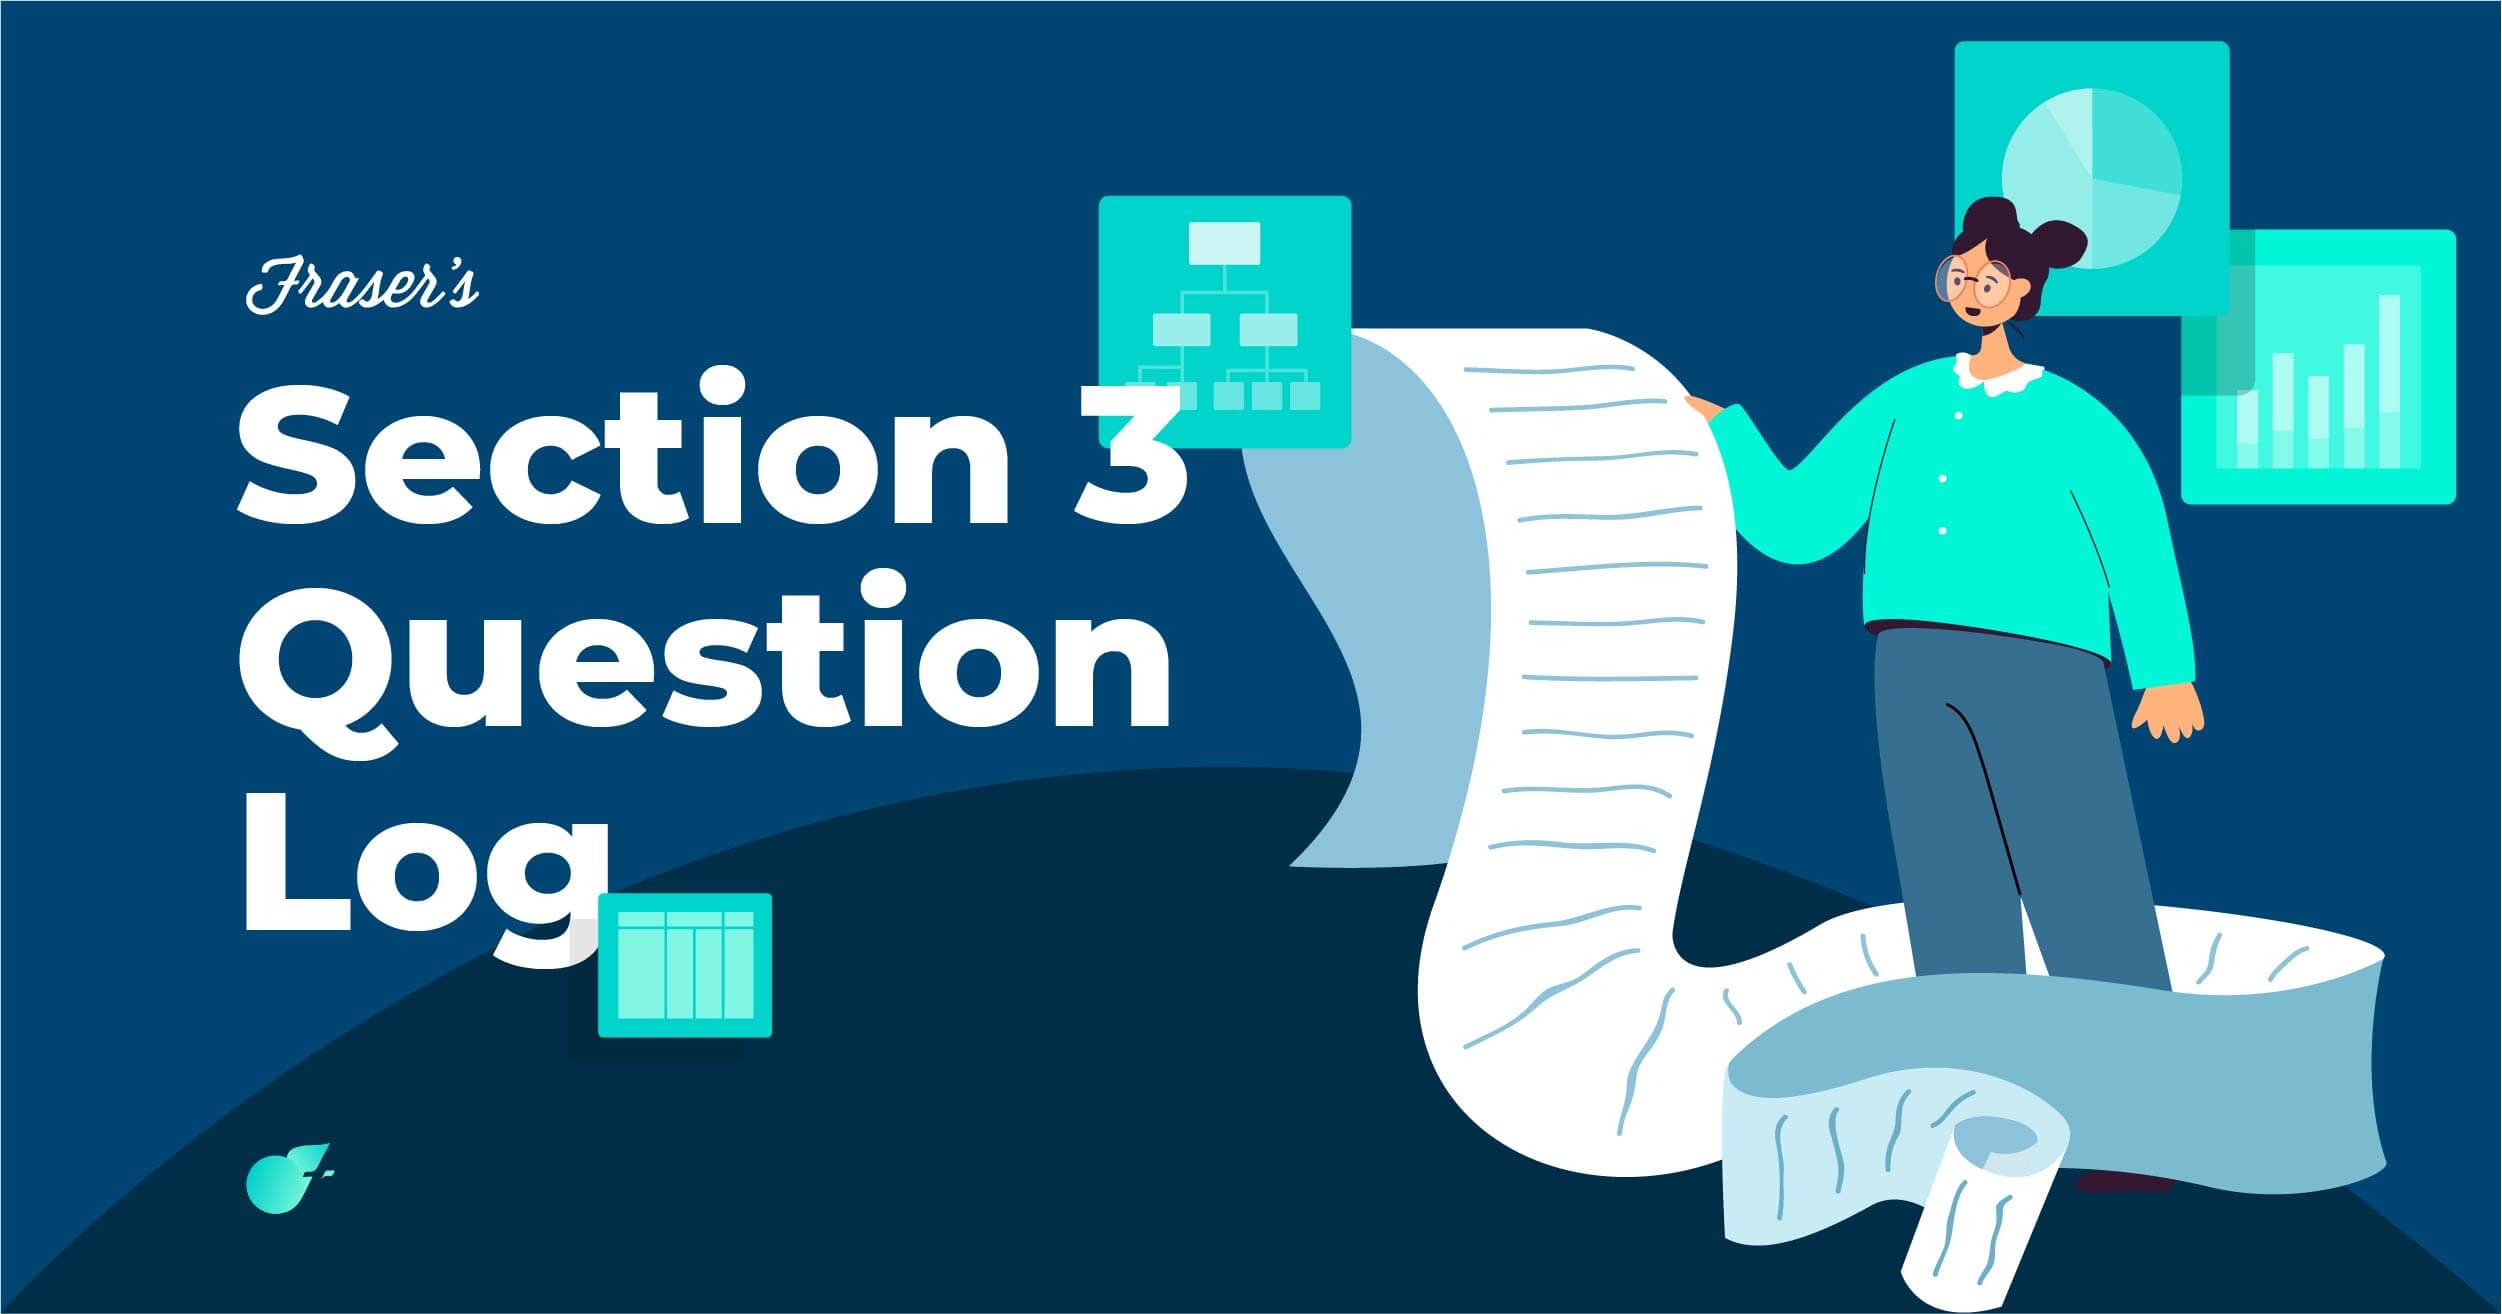 section 3 question log - gamsat practice questions